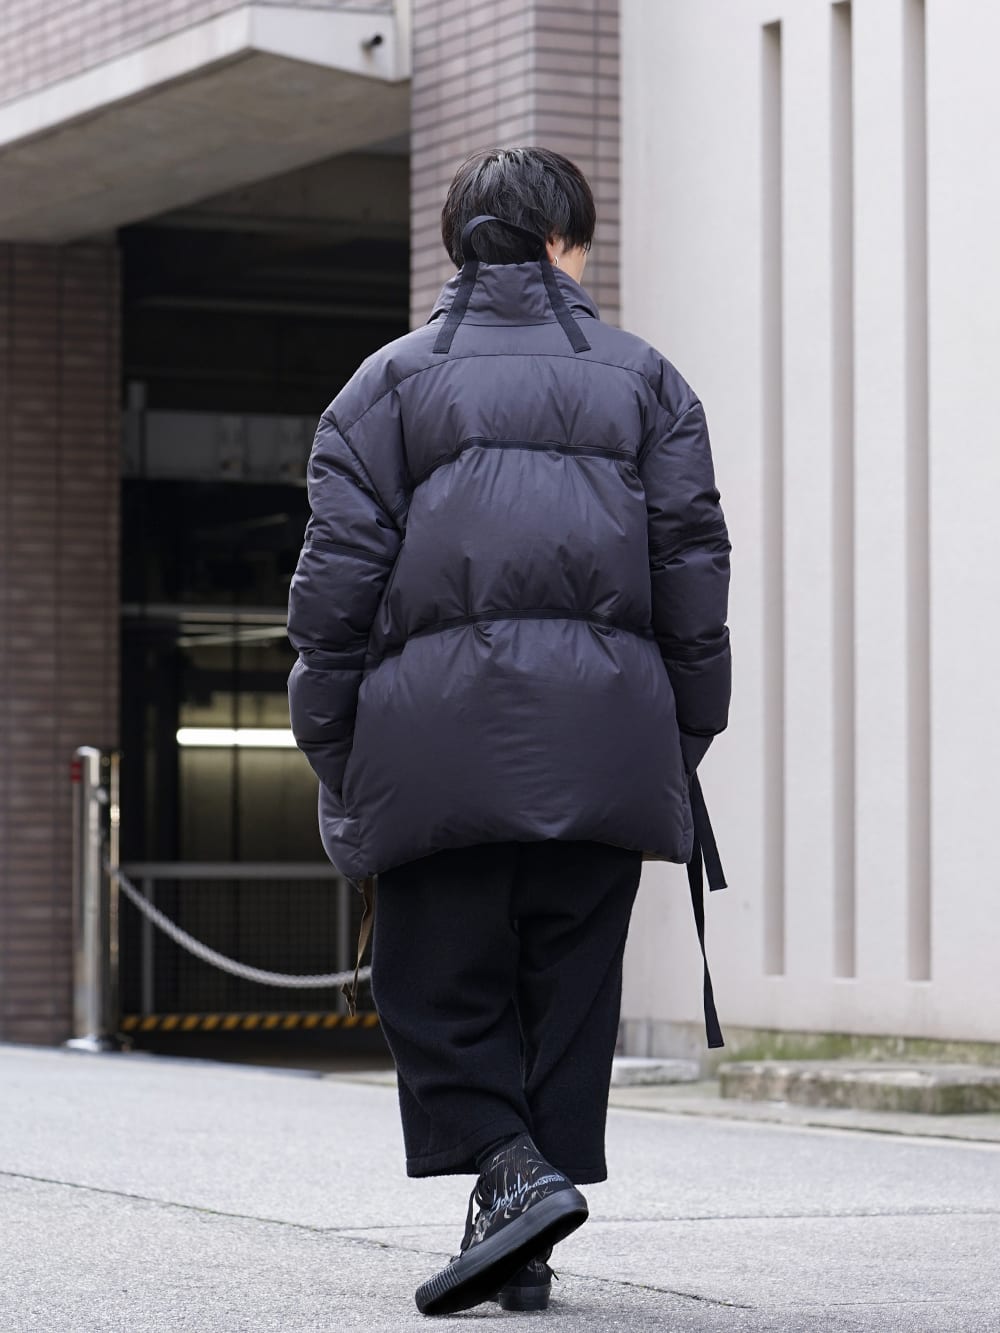 ZIGGY CHEN Over Sized Down Jacket Style - FASCINATE BLOG